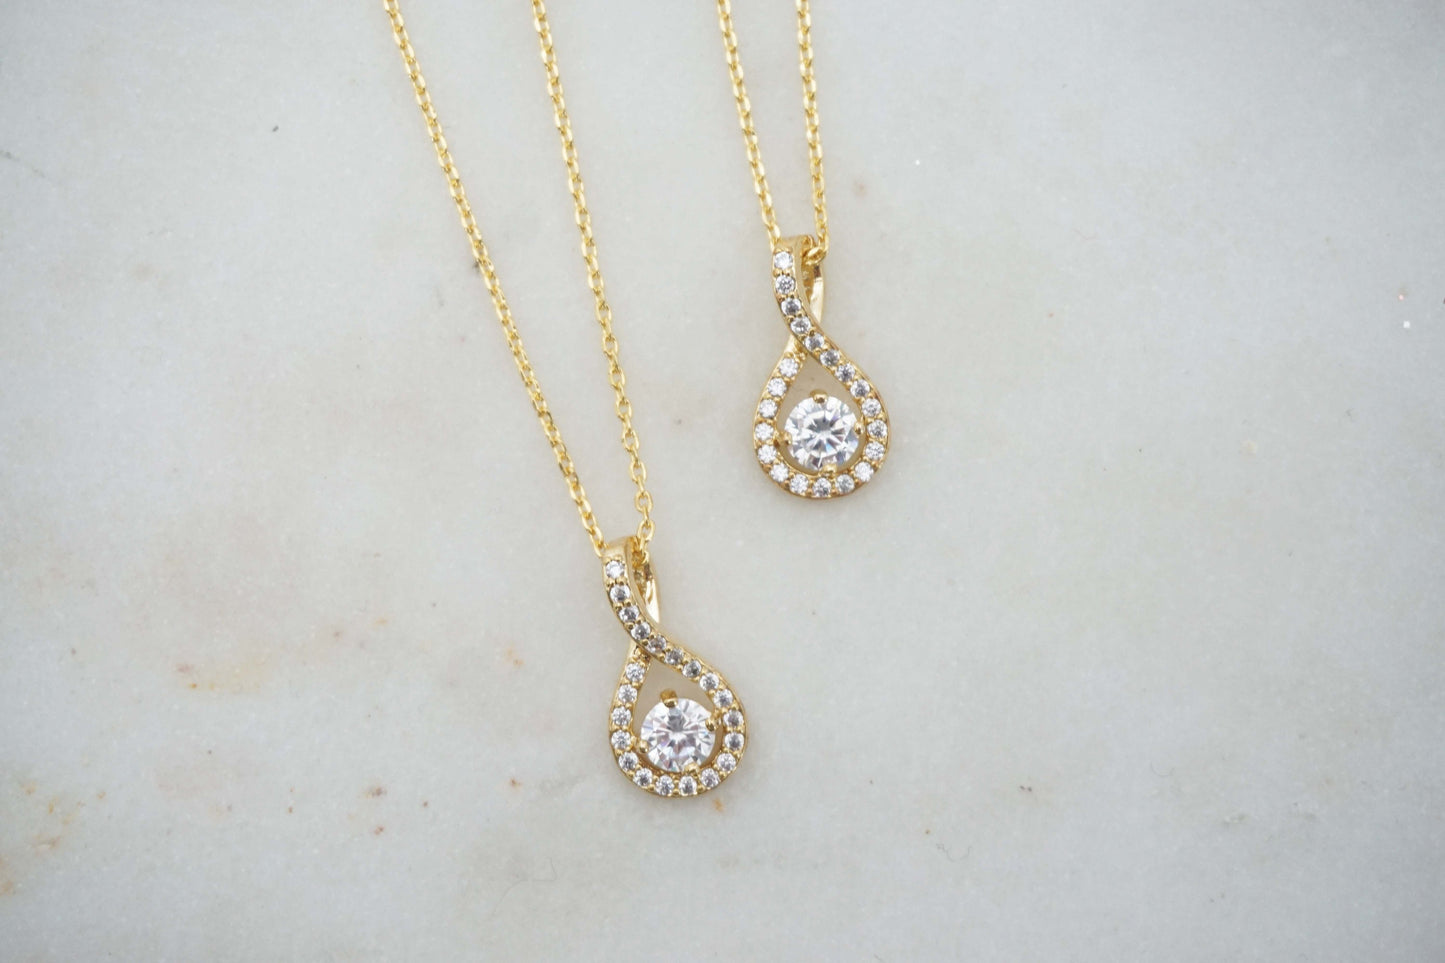 Crystal Gem and Gold Twist Necklace | Bridesmaid Necklaces | Wedding Jewelry | NCG21, NCS21